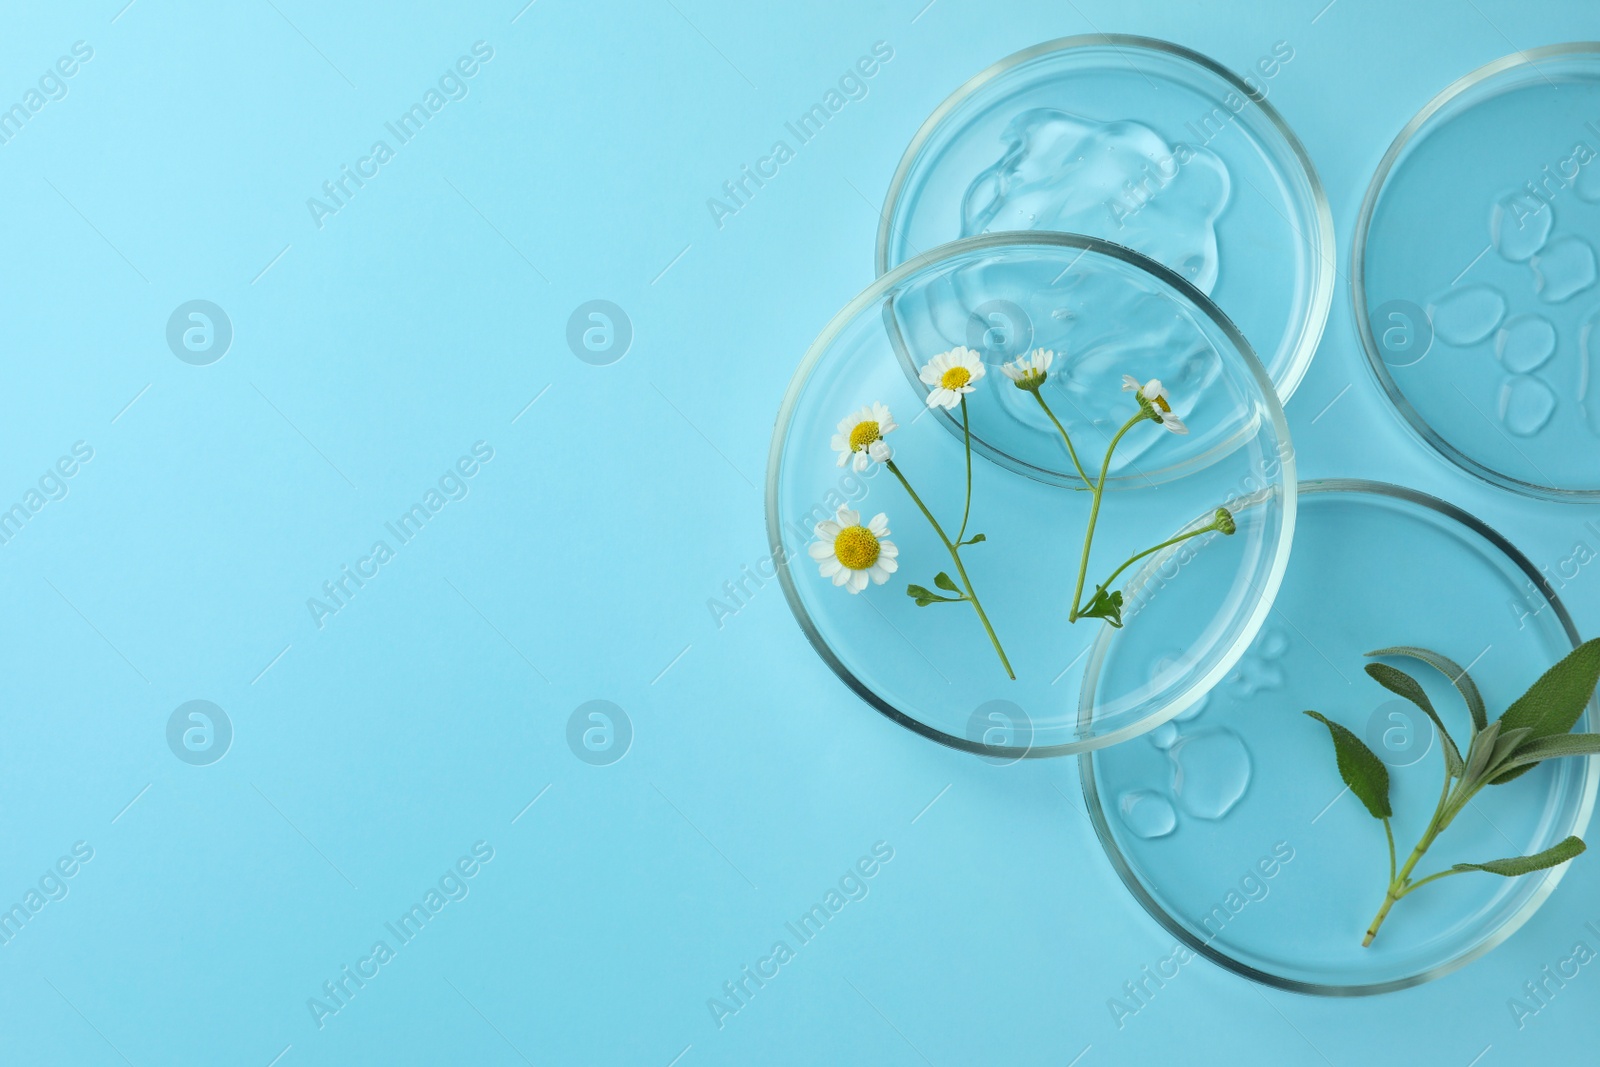 Photo of Flat lay composition with Petri dishes and plants on light blue background. Space for text